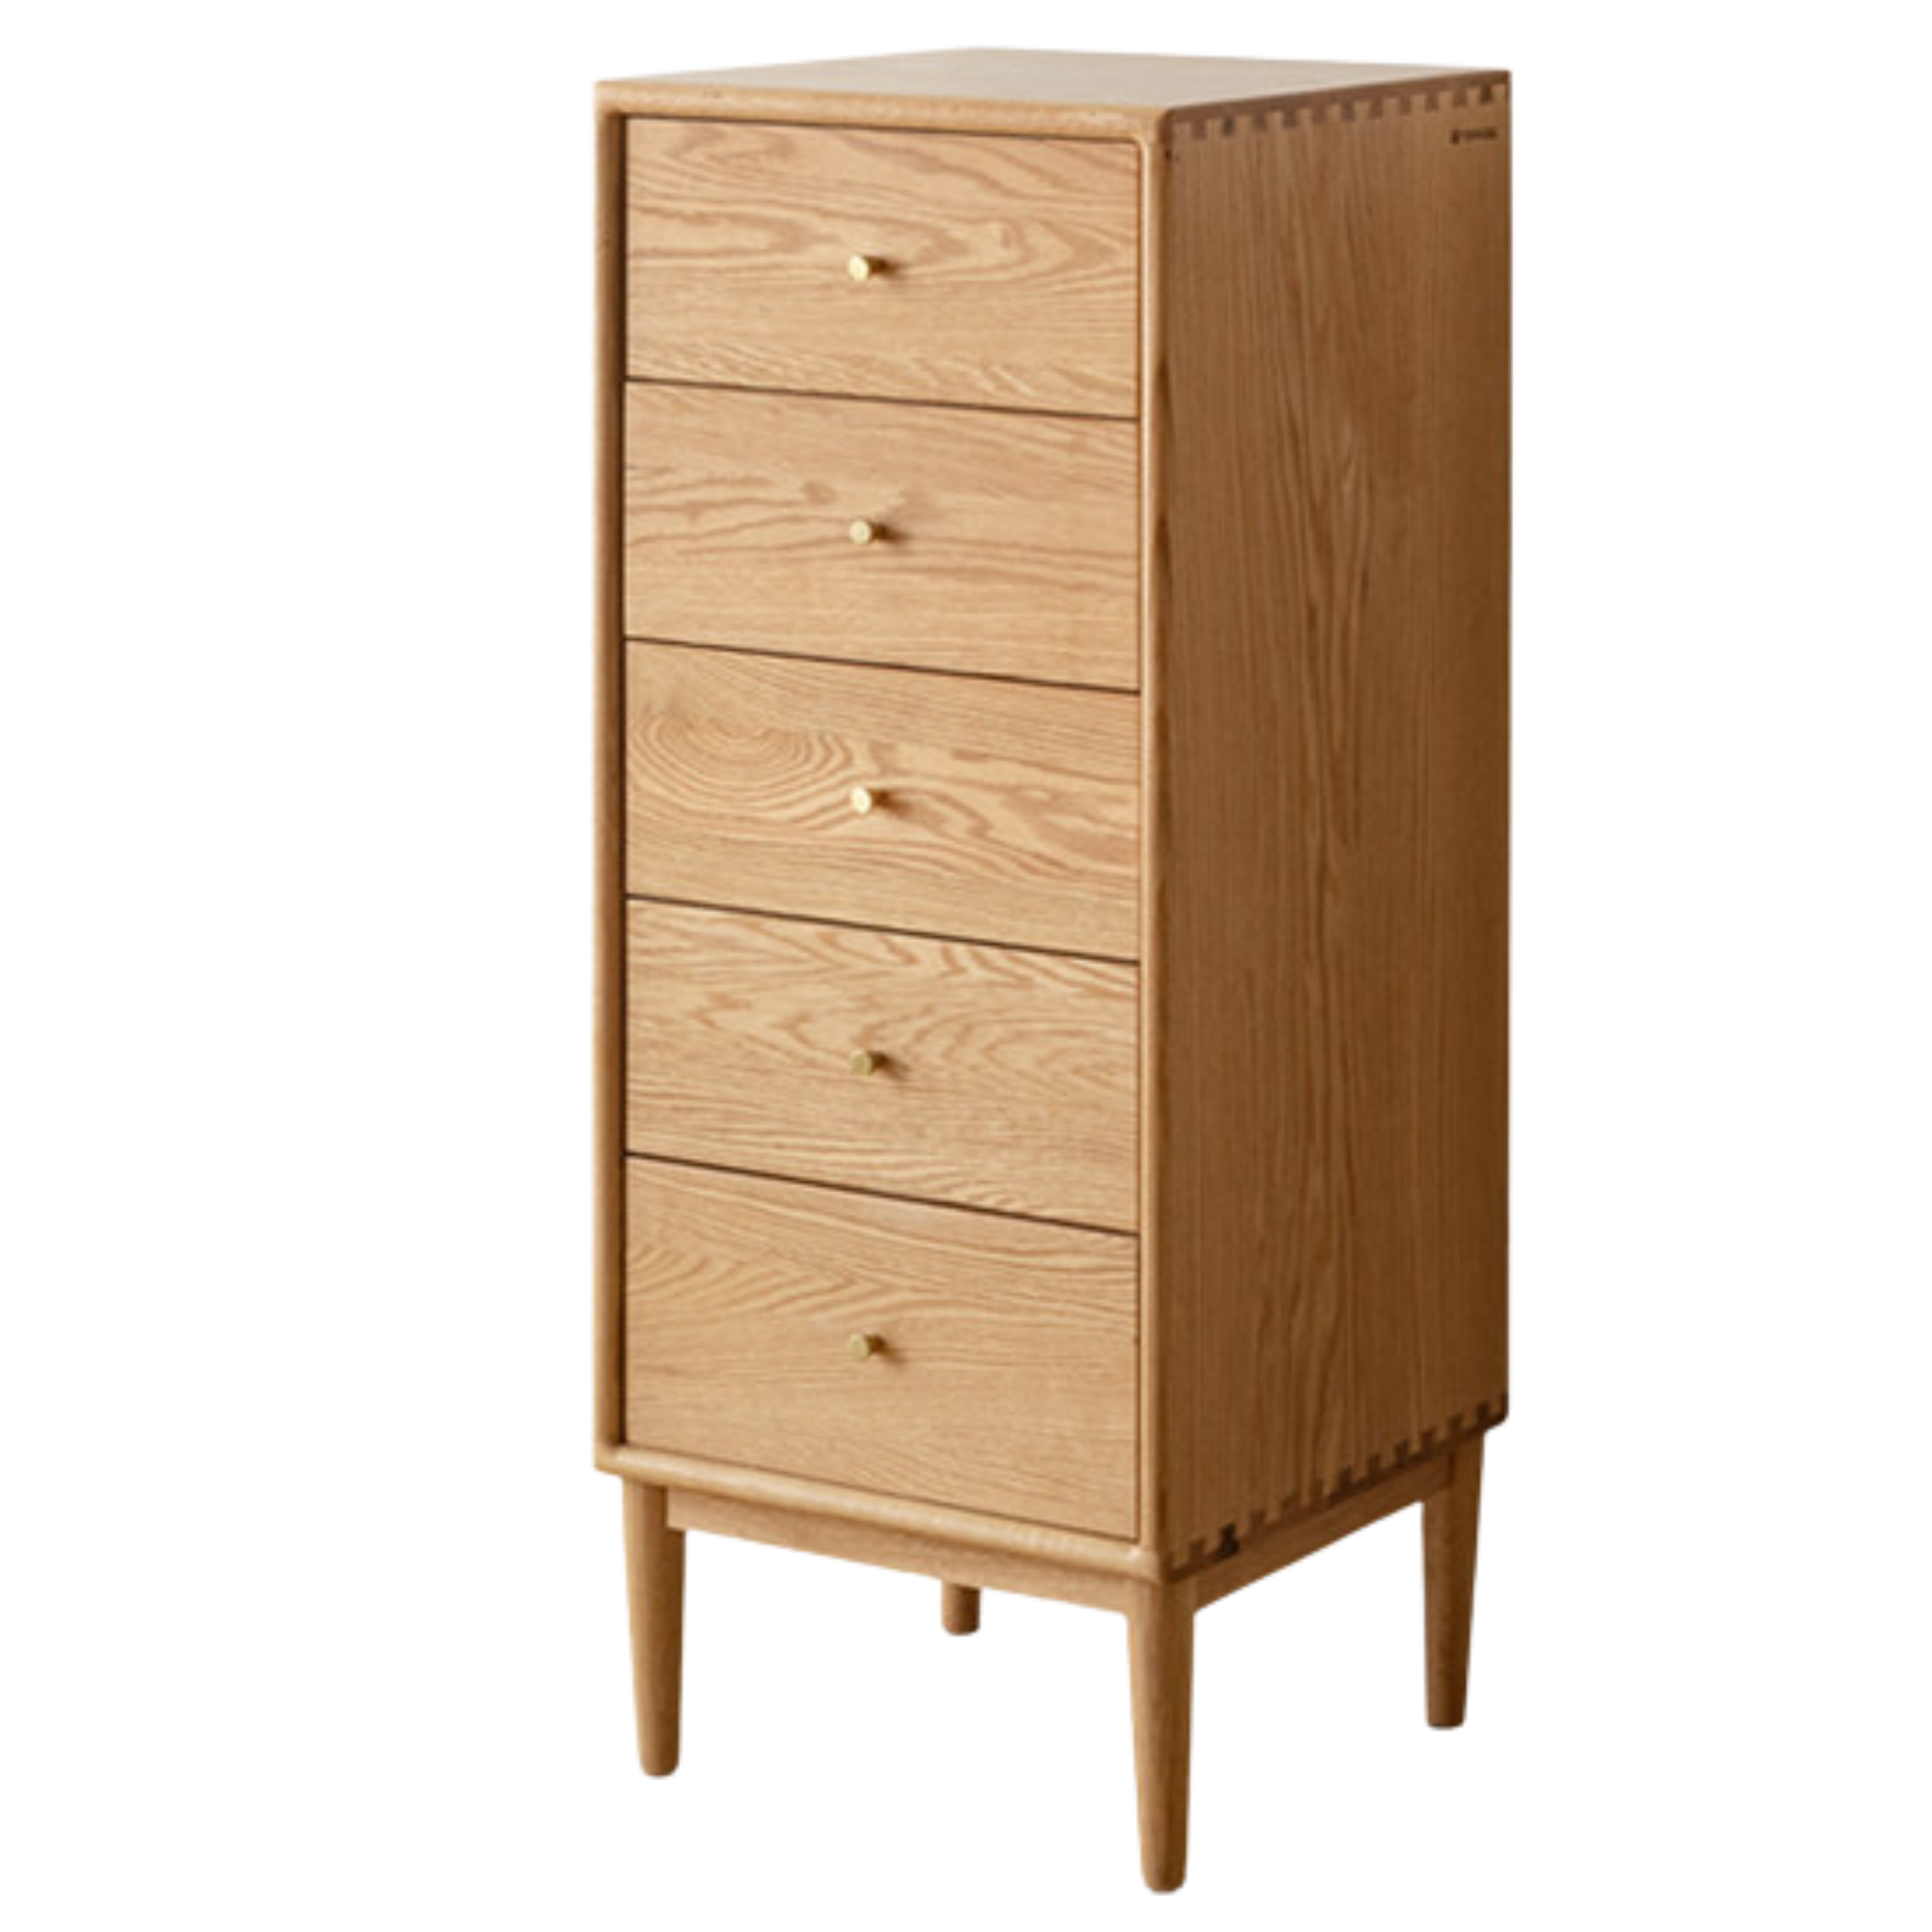 Oak solid wood Chest of drawers: